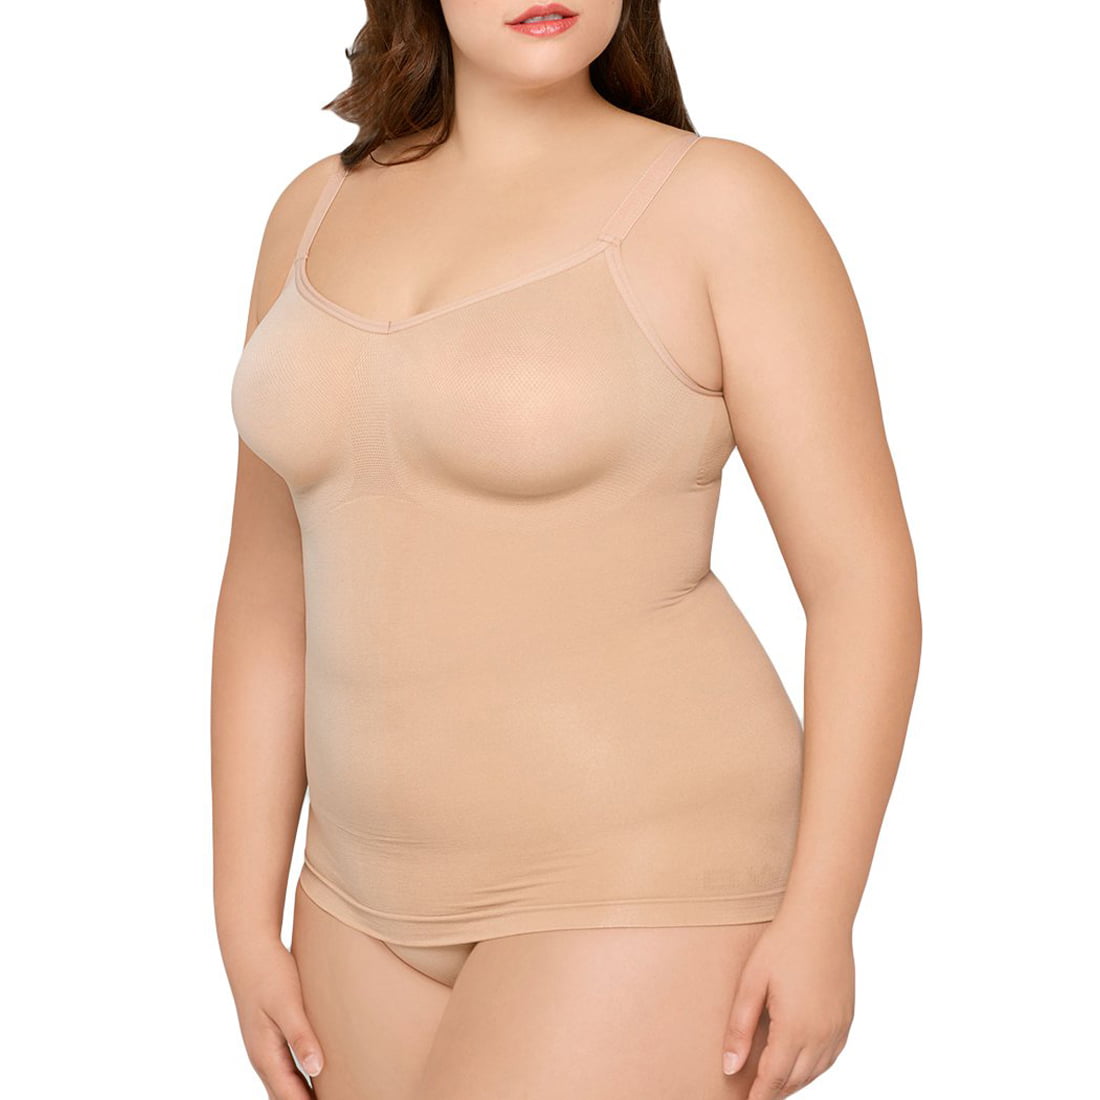 Body Wrap Women's Full Figure Firm Support Camisole, Nude, X-Large 